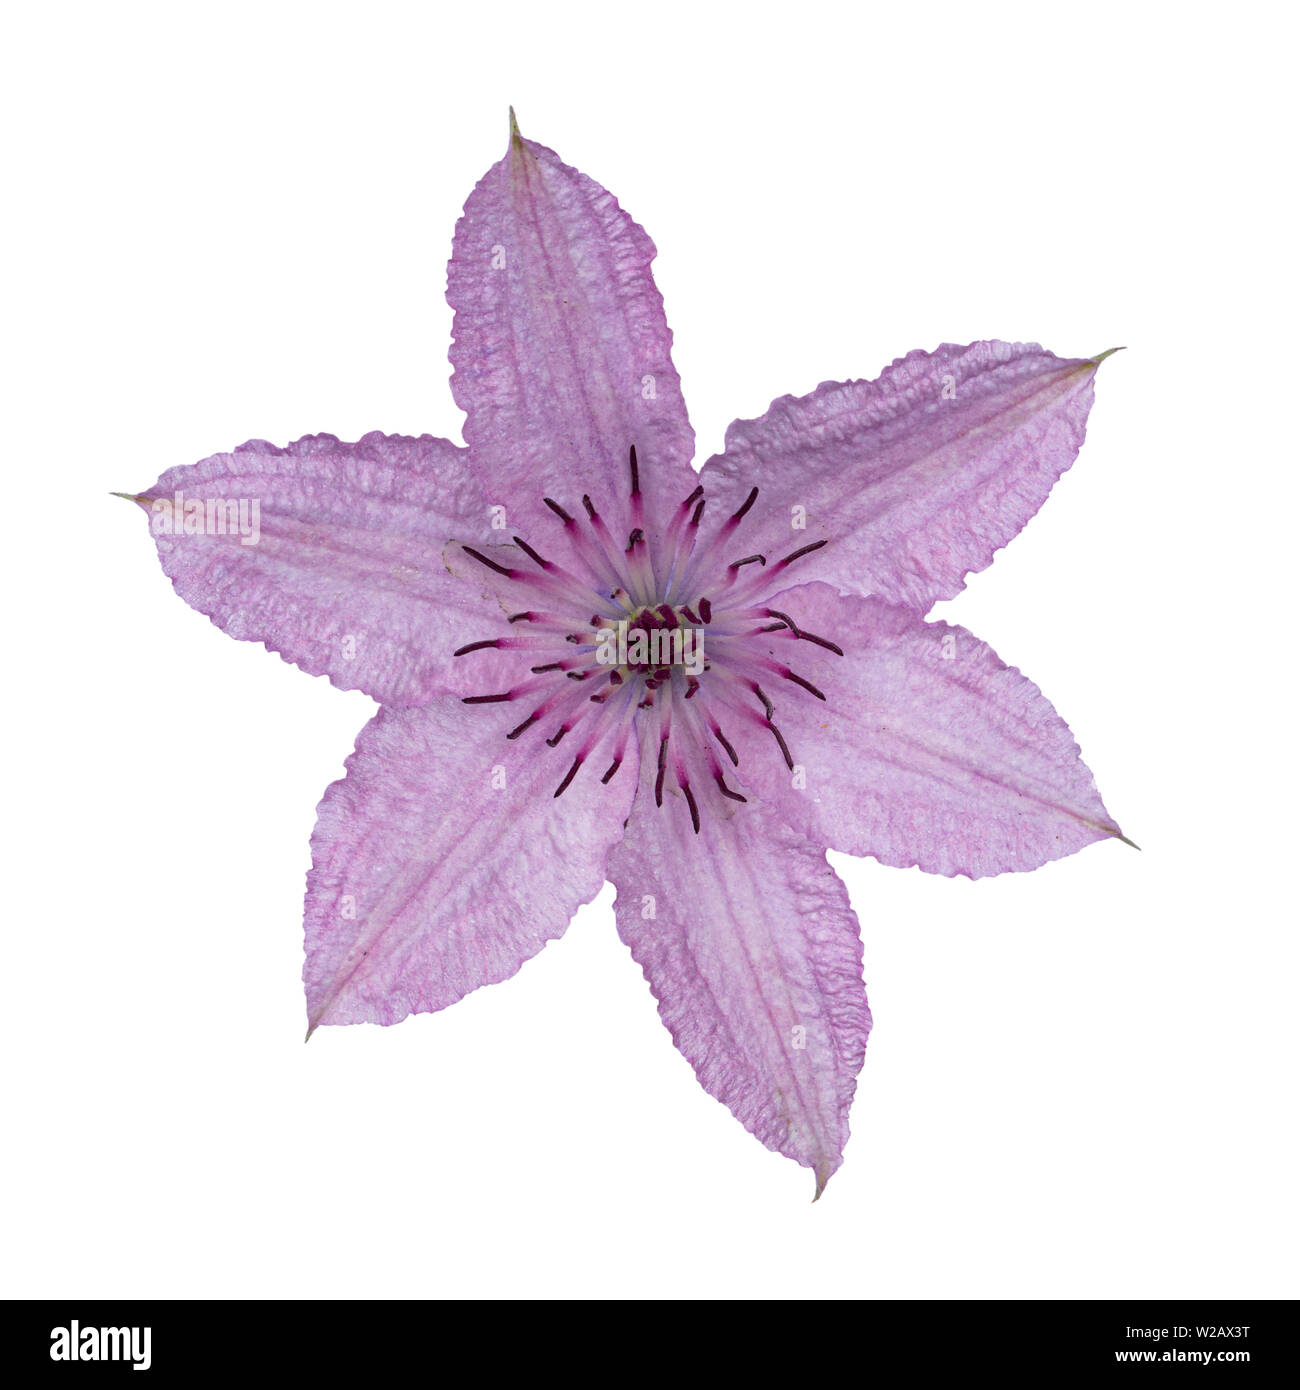 Top view of single blooming Clematis Hagley Hybrid flowe. Isolated on white background. Stock Photo